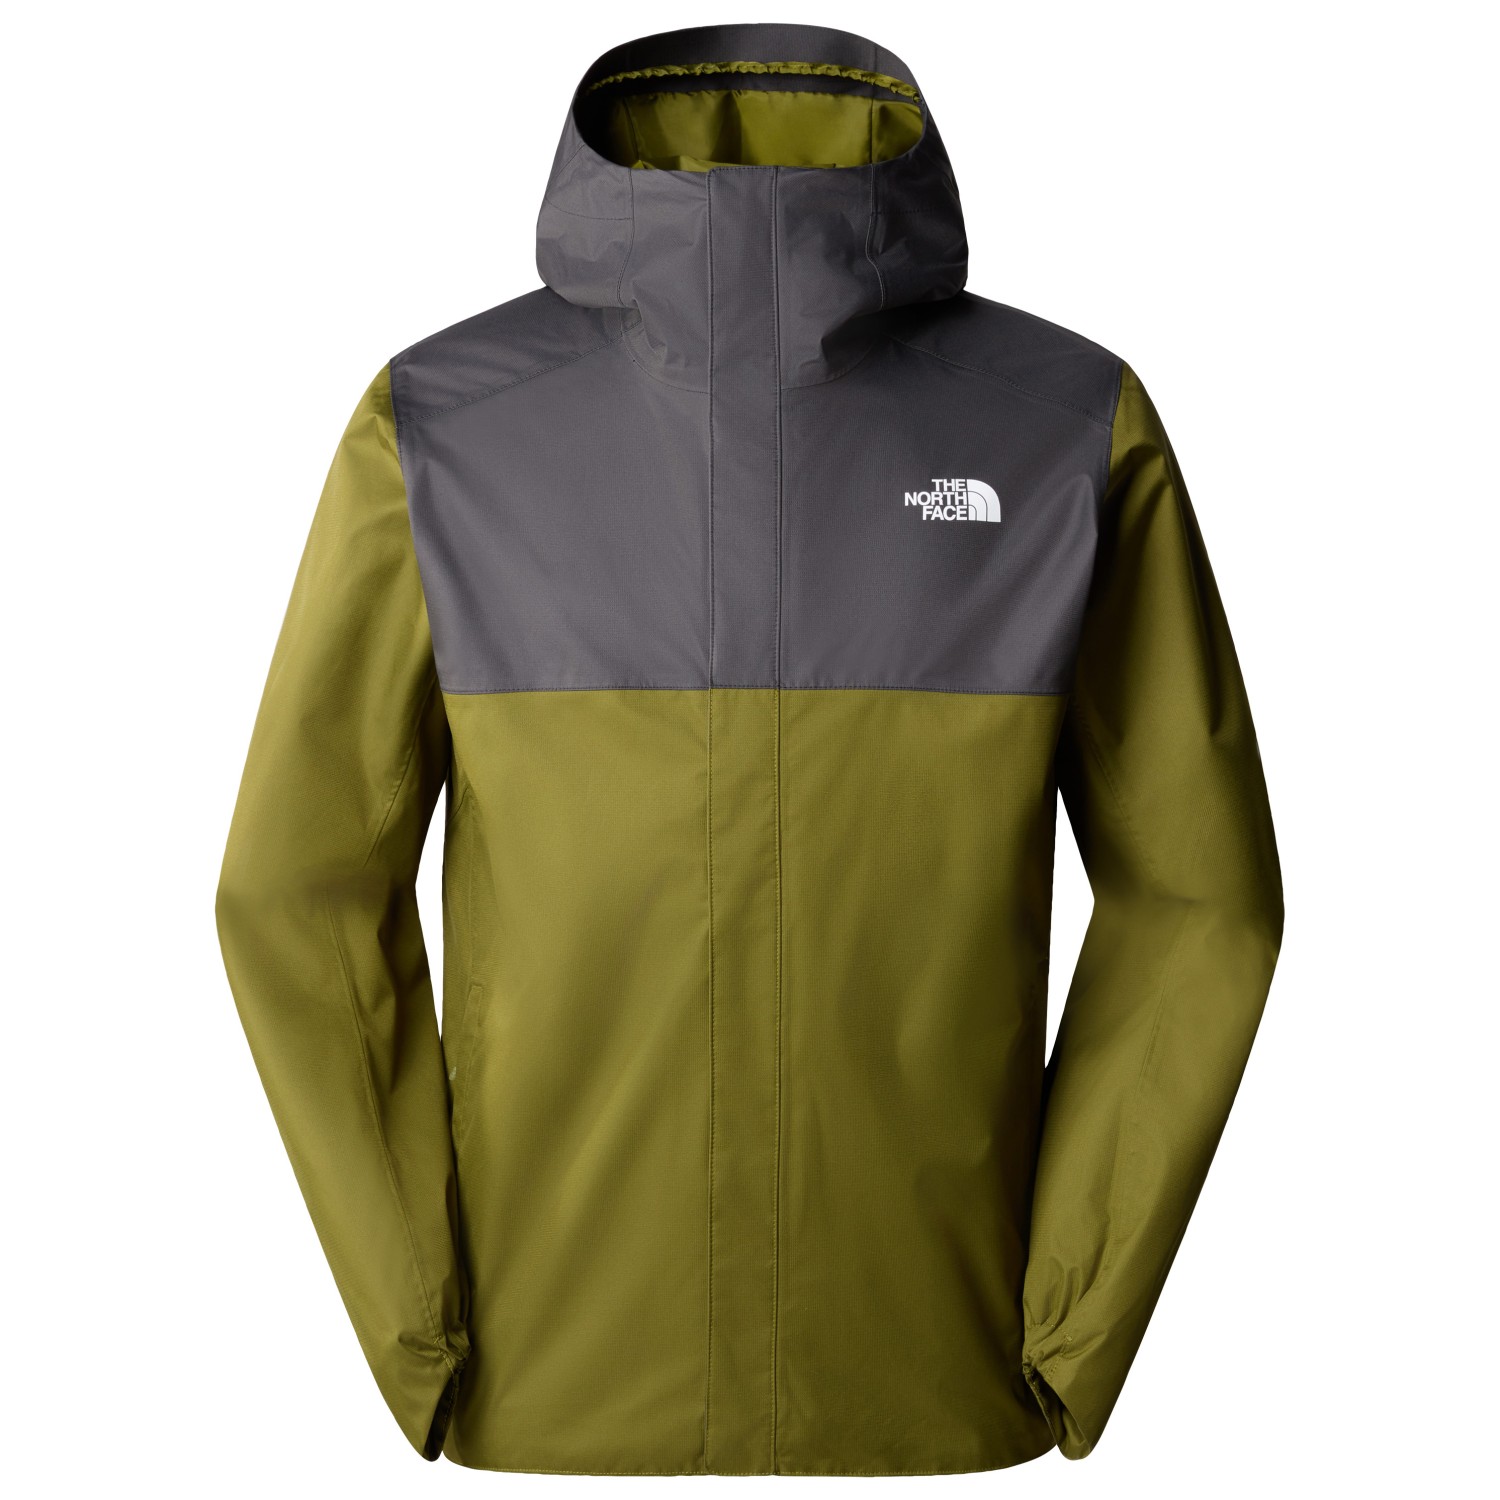 Дождевик The North Face Quest Zip In, цвет Forest Olive/Asphalt Grey дождевик the north face quest zip in цвет forest olive asphalt grey